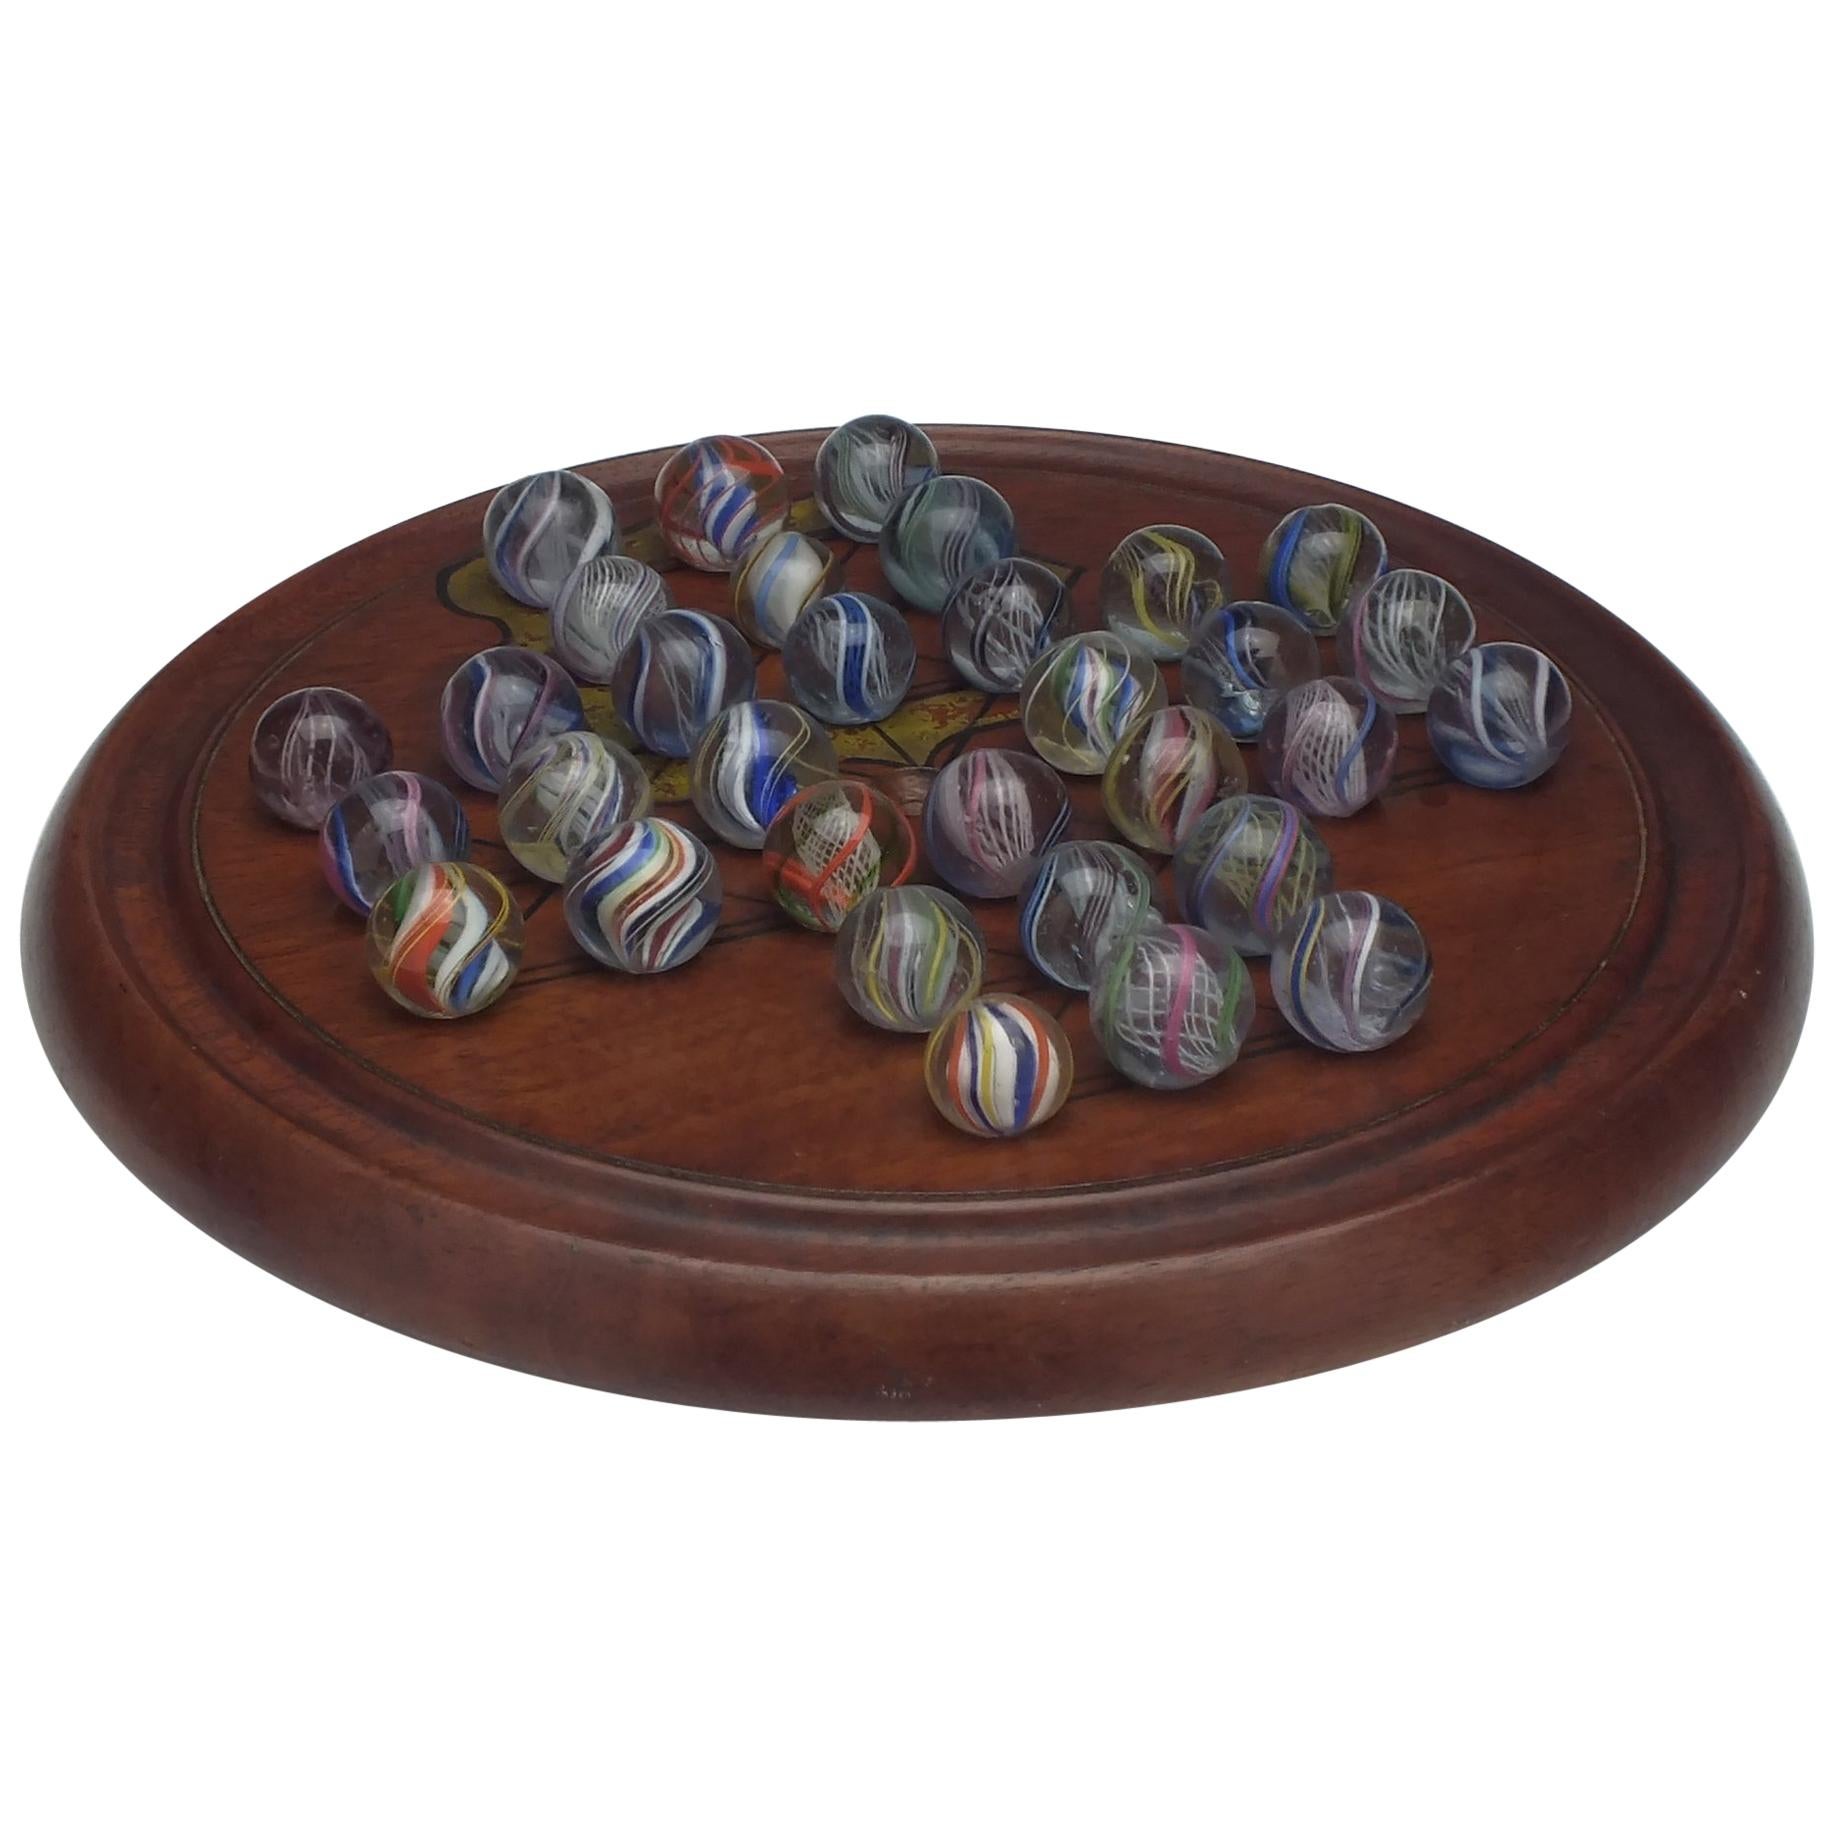 Antique Solitaire Board and 19th Century German Marbles, circa 1870